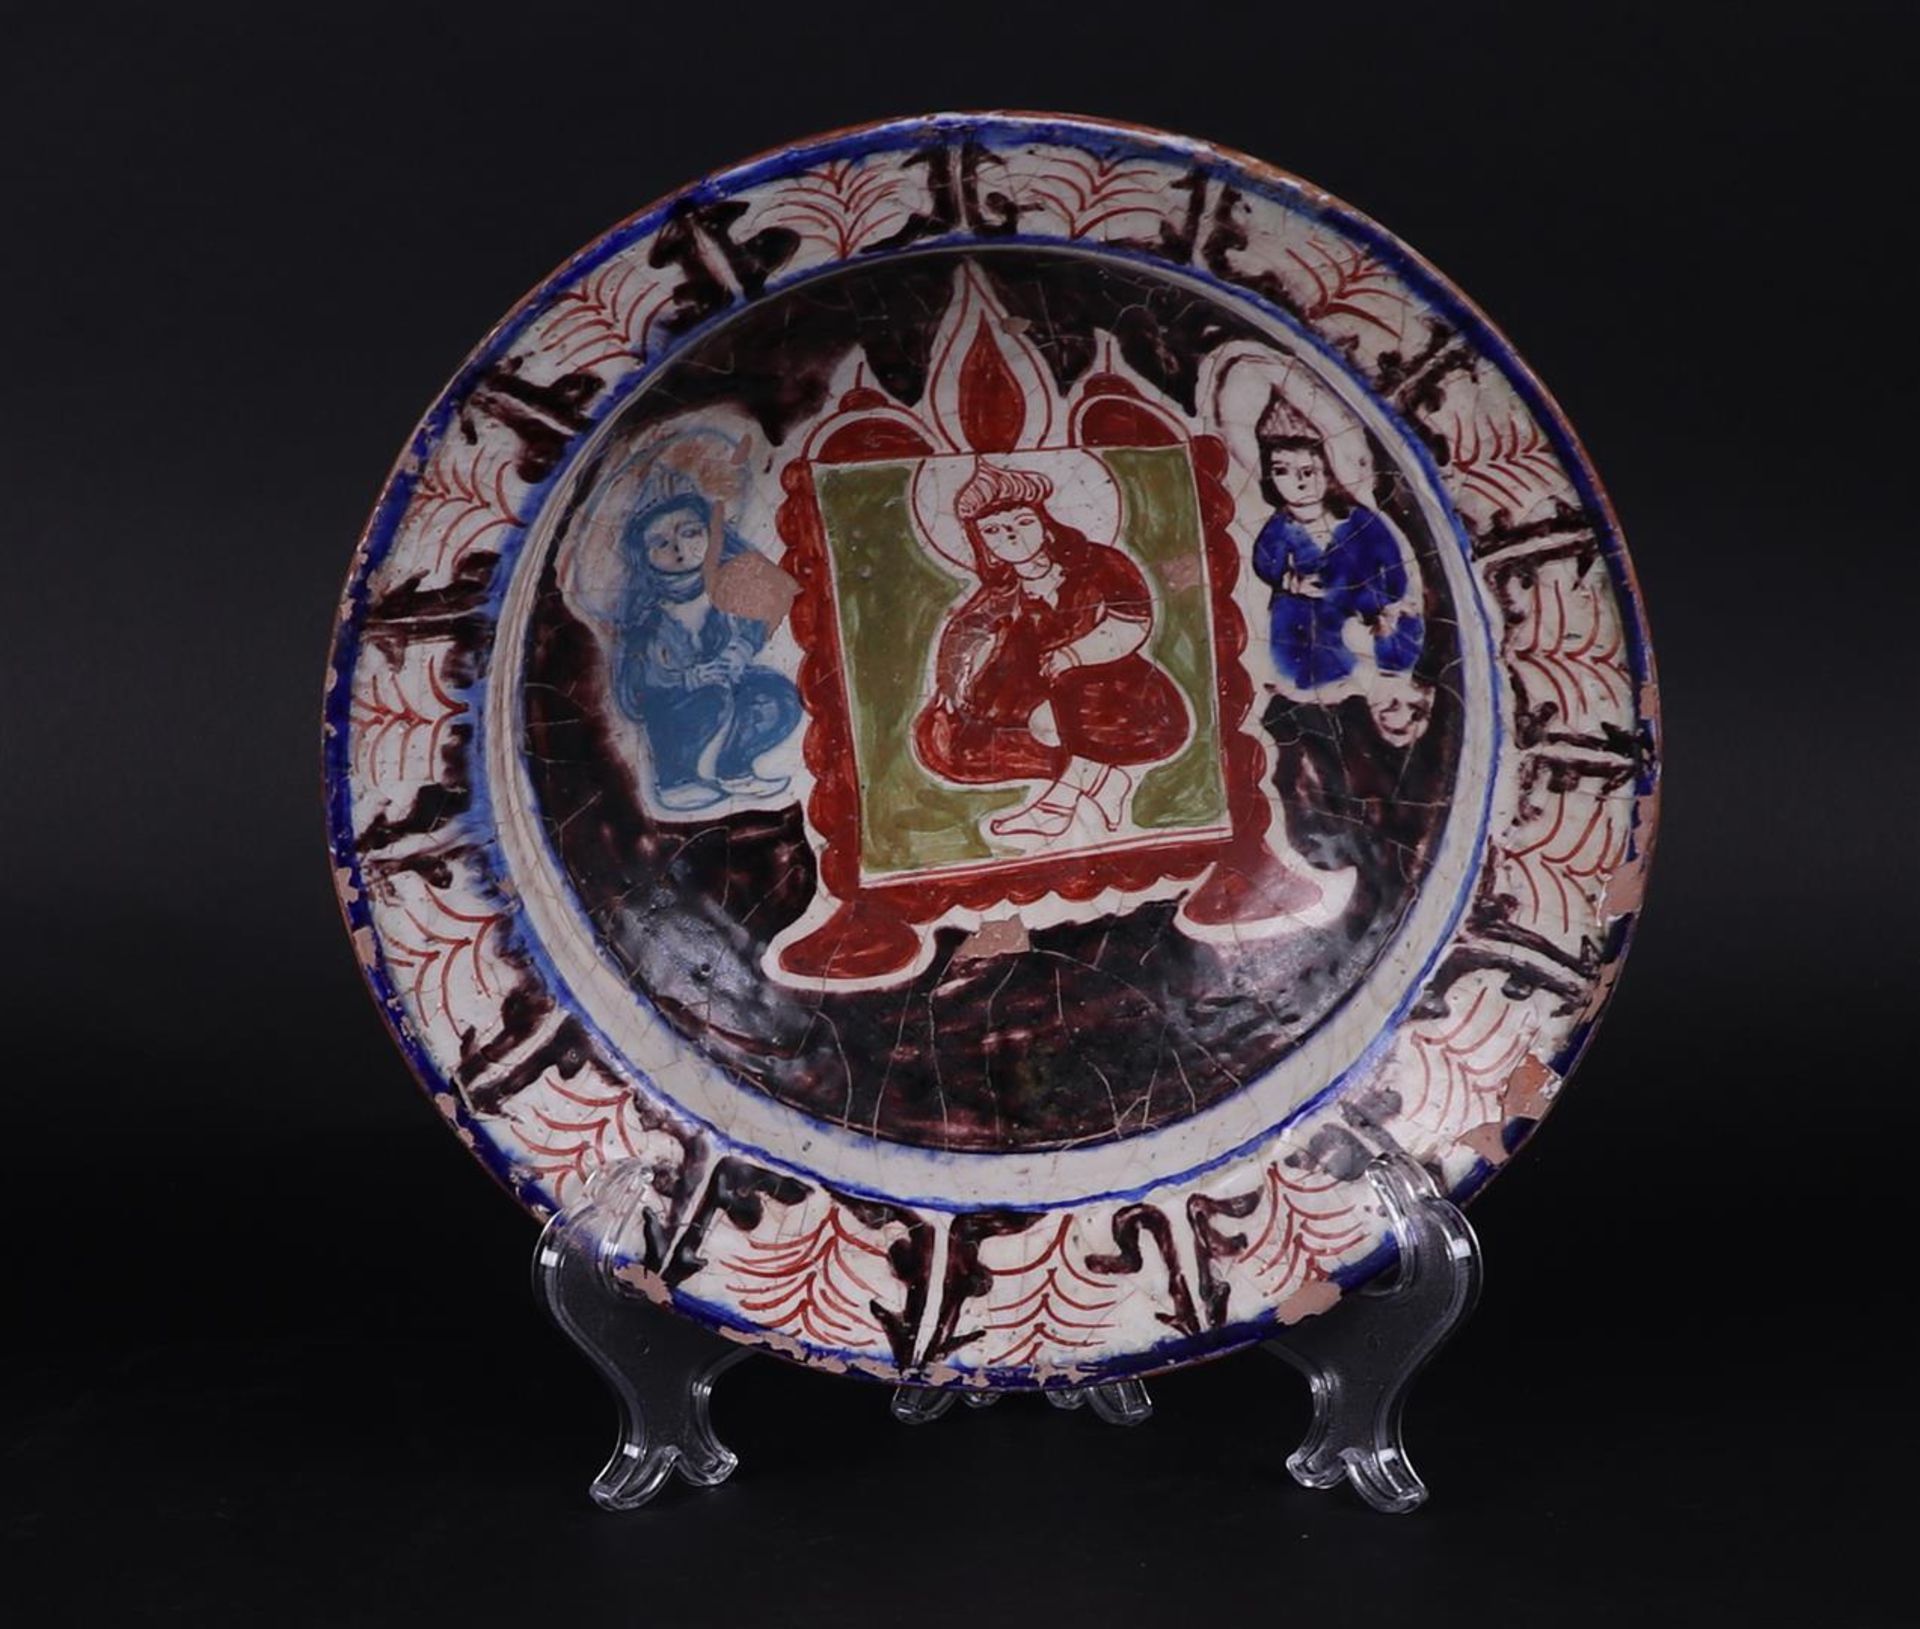 An earthenware Nishapur bowl with floral decor and decorated in the center with a figure. 